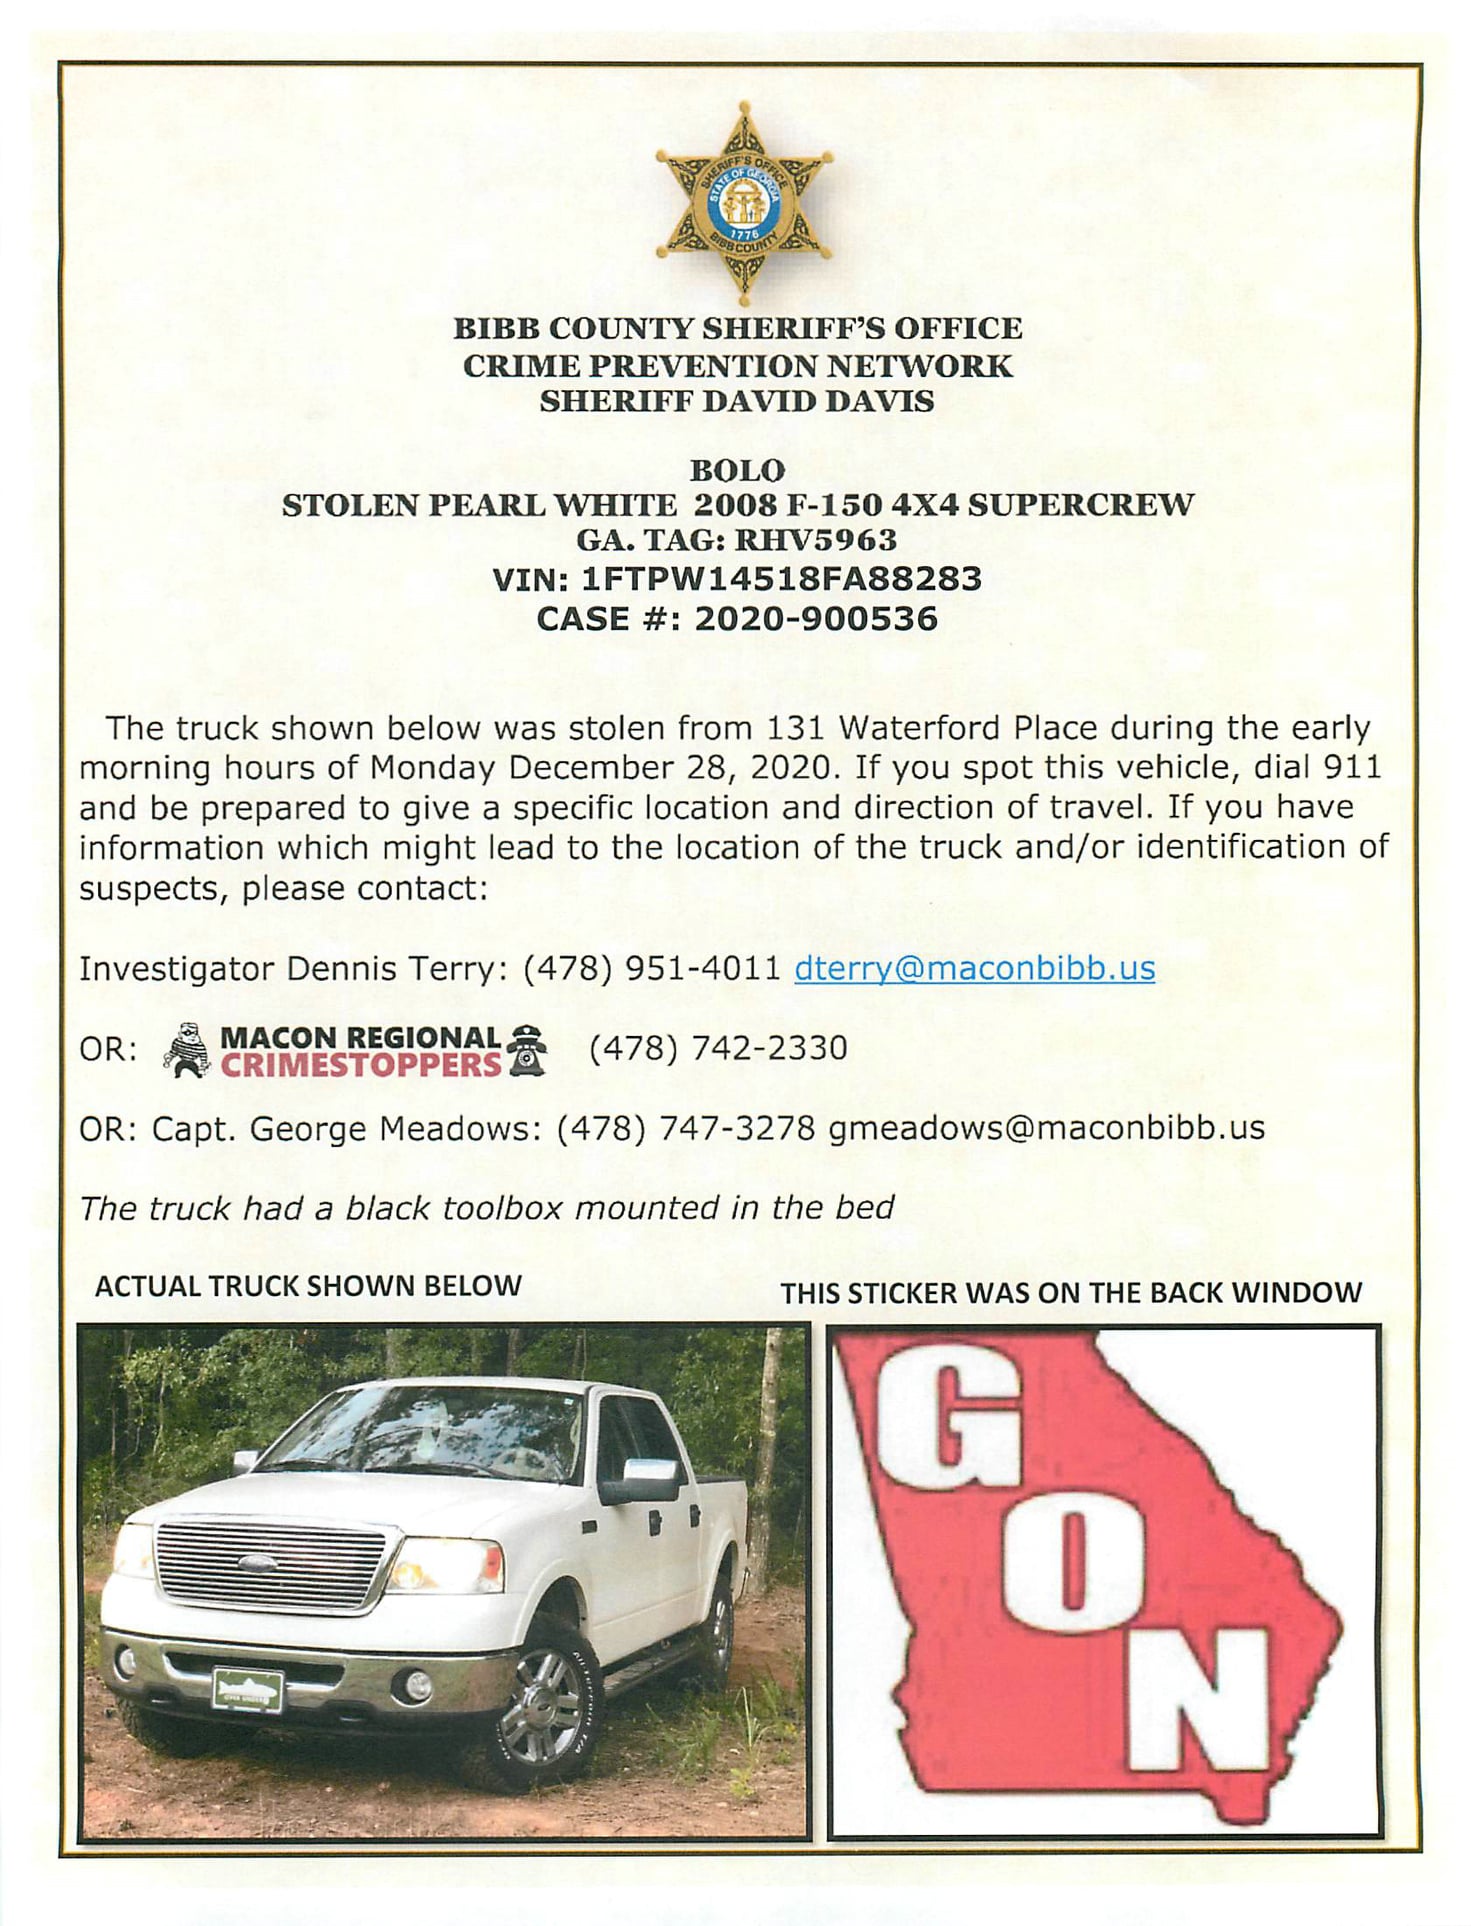 2008 F-150 4x4 Supercrew #stolen from Waterford Place